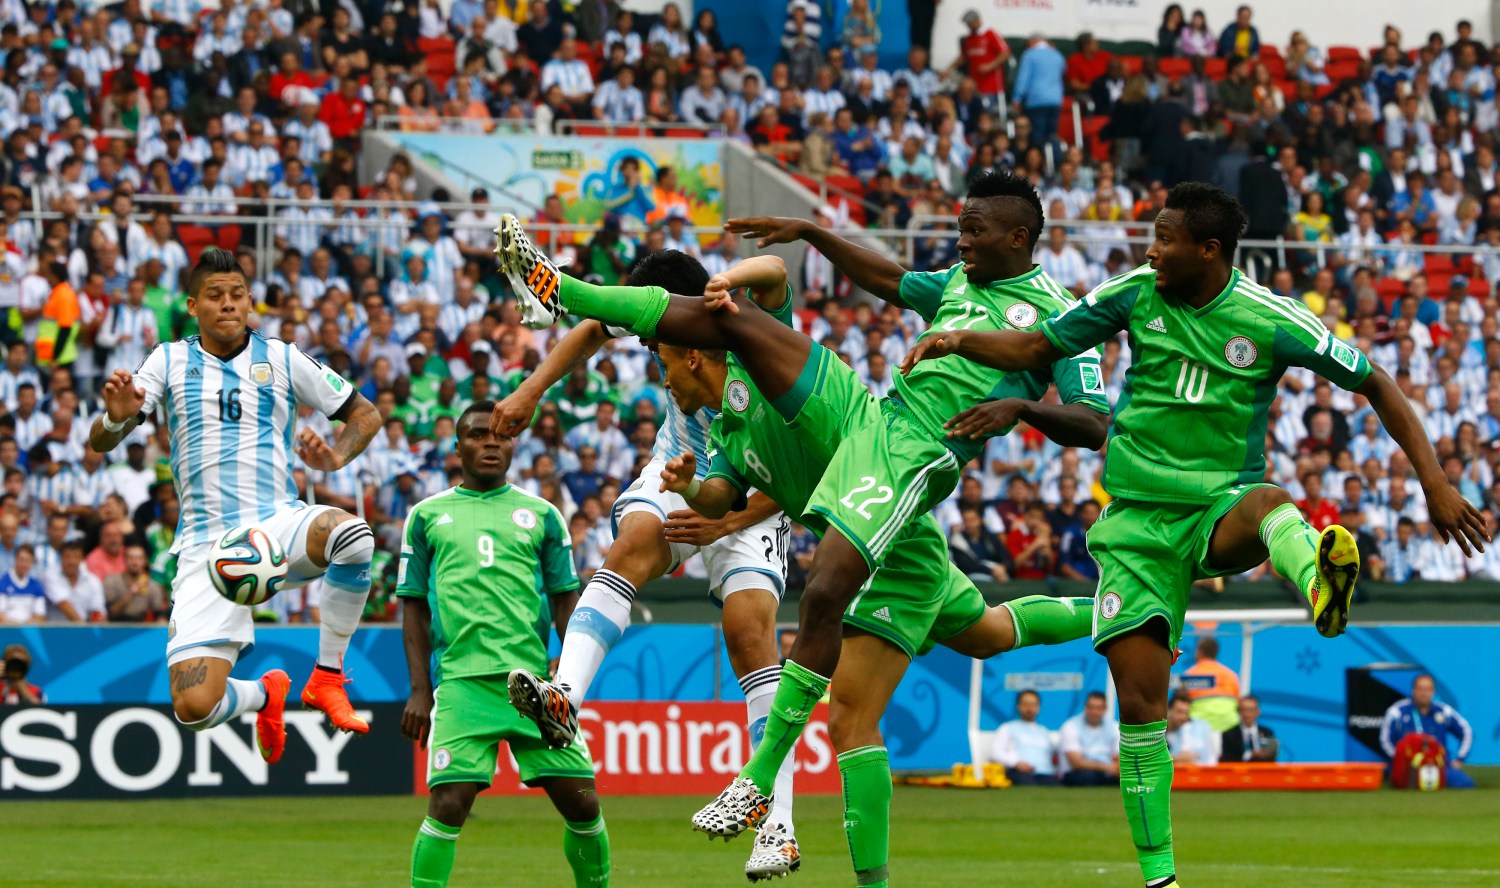 World Cup penalty shootout rules: Explaining the format, history